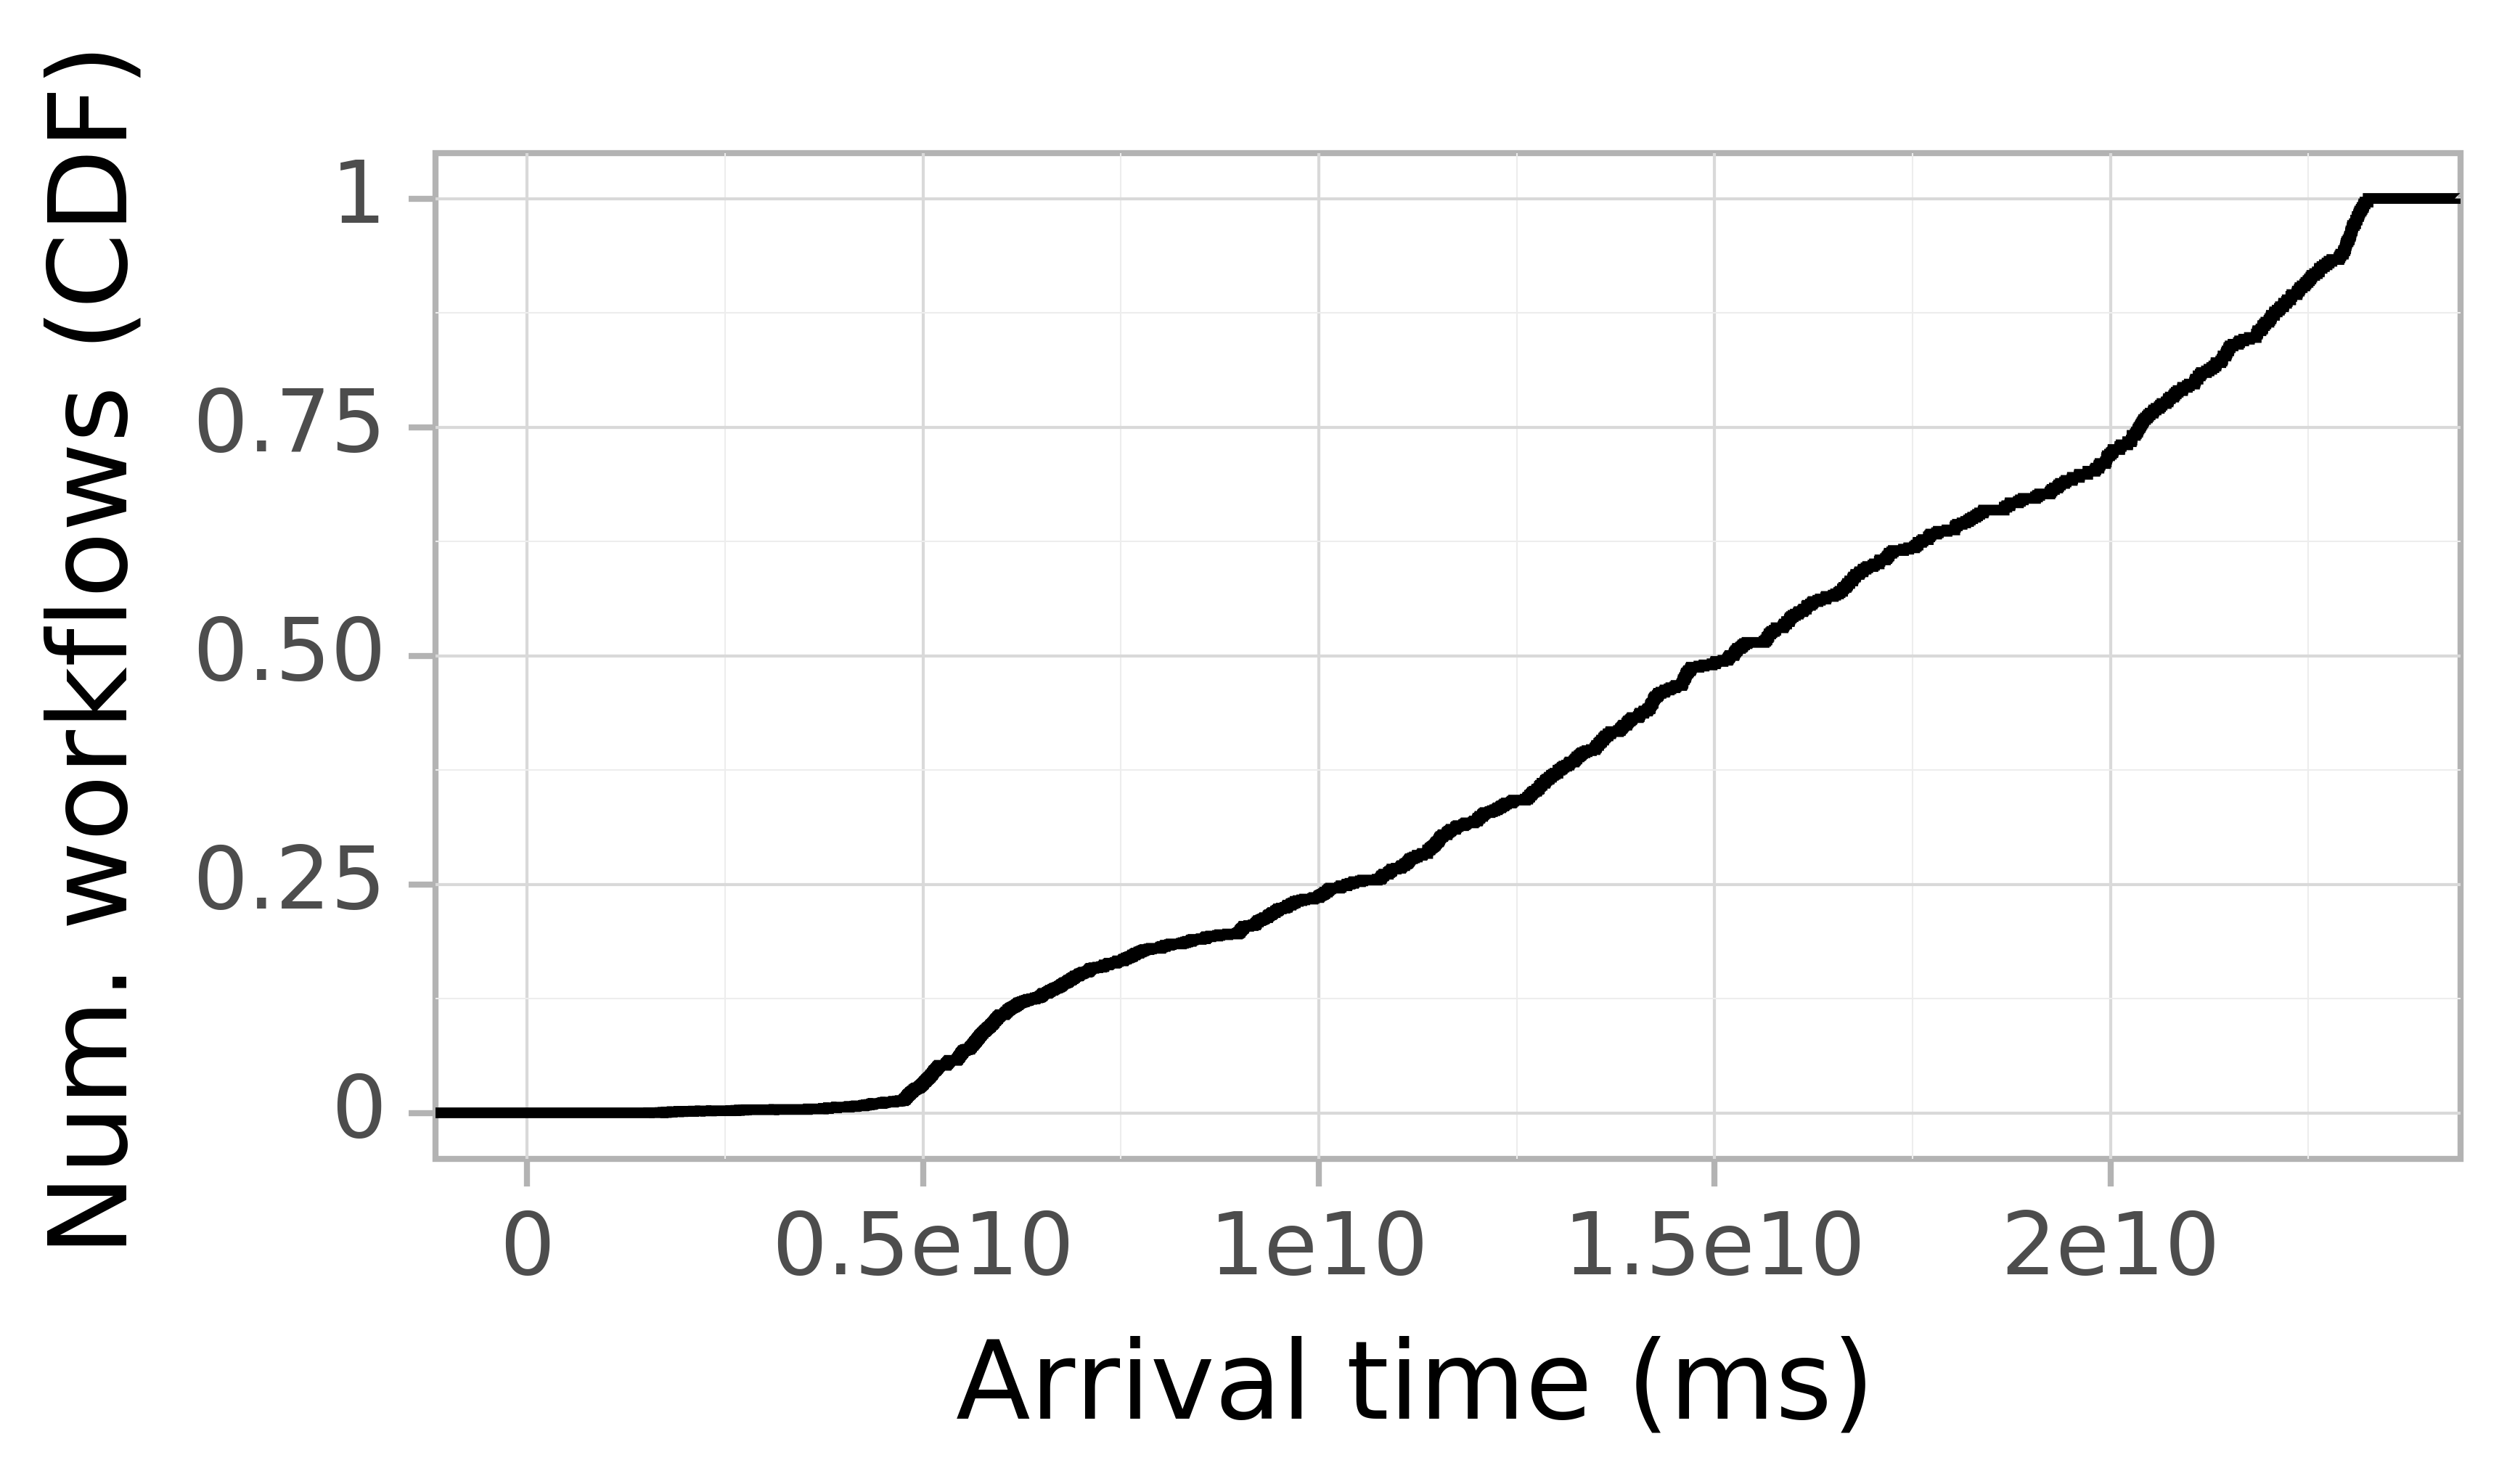 Job arrival CDF graph for the Two_Sigma_dft trace.